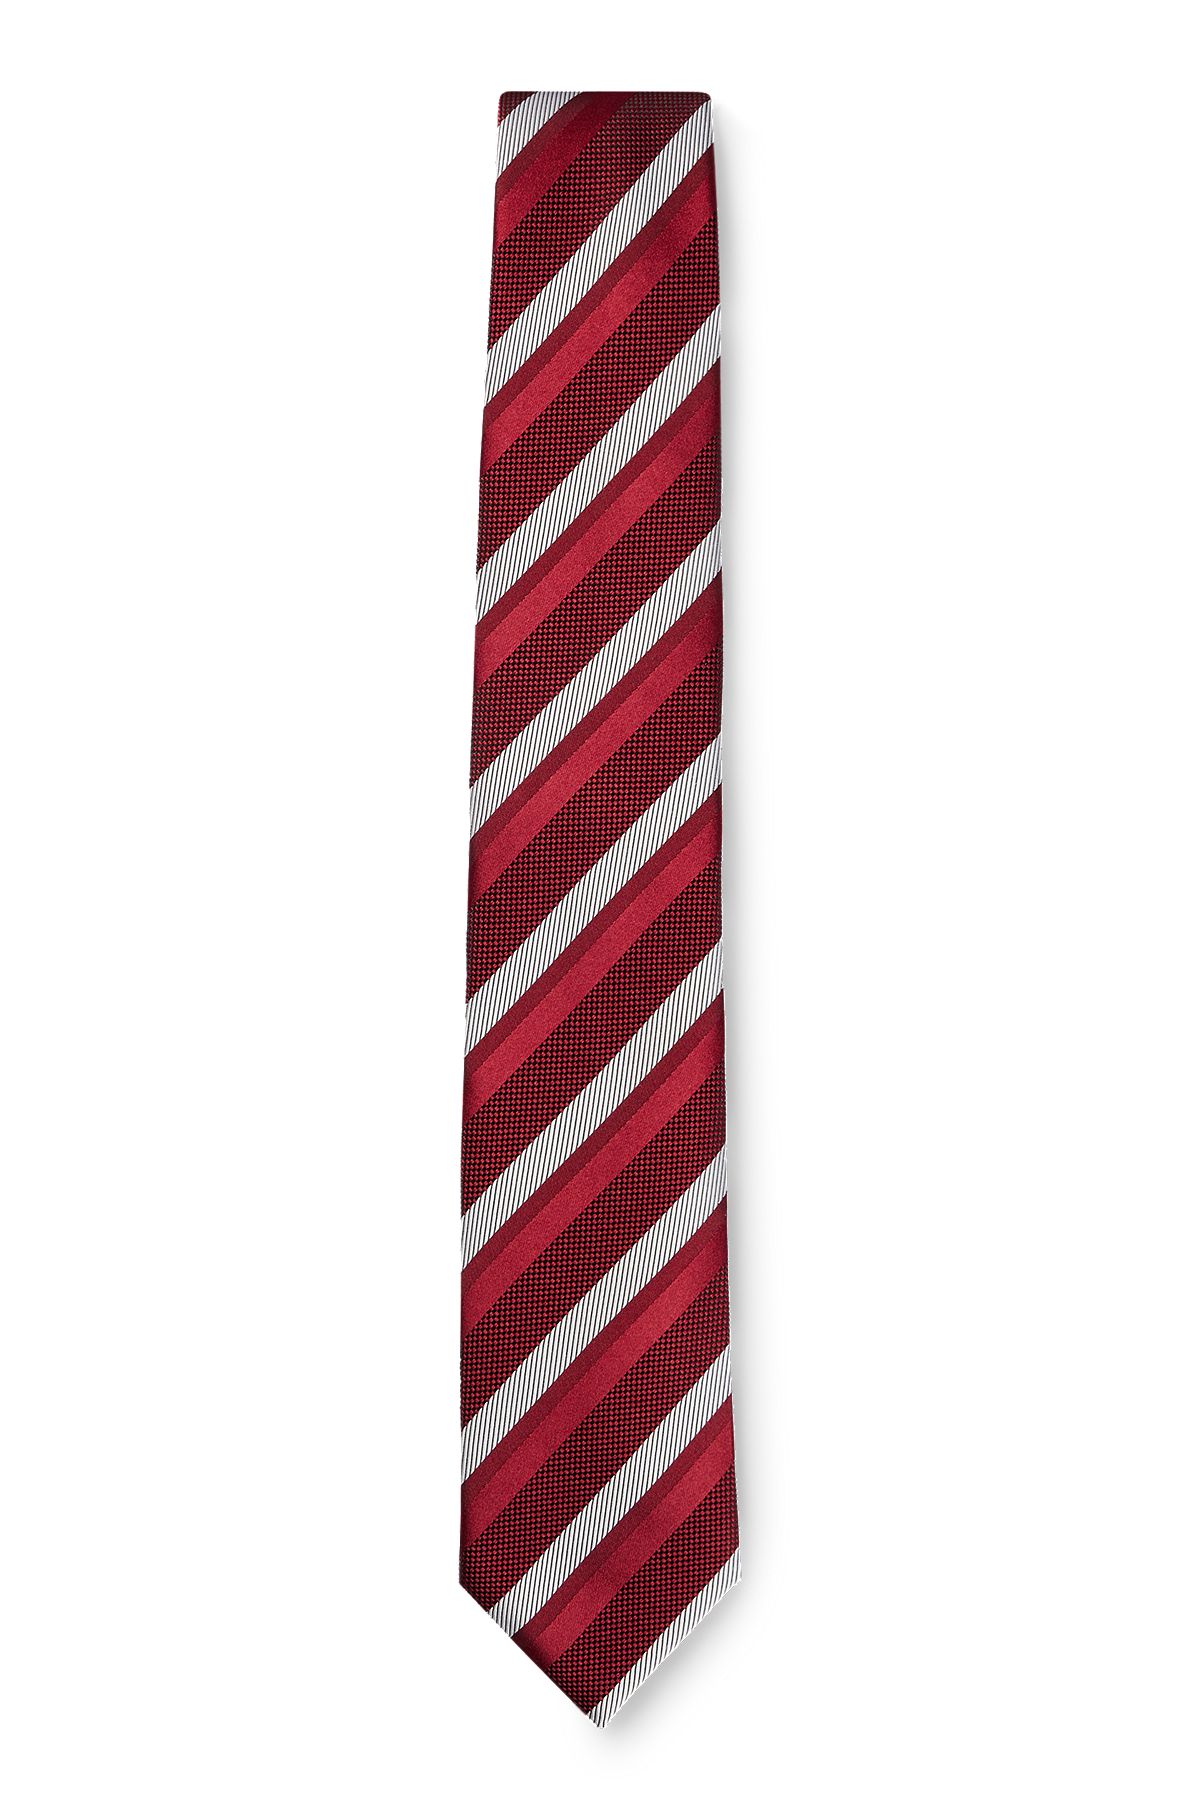 Silk-blend tie with all-over jacquard pattern, Dark Red